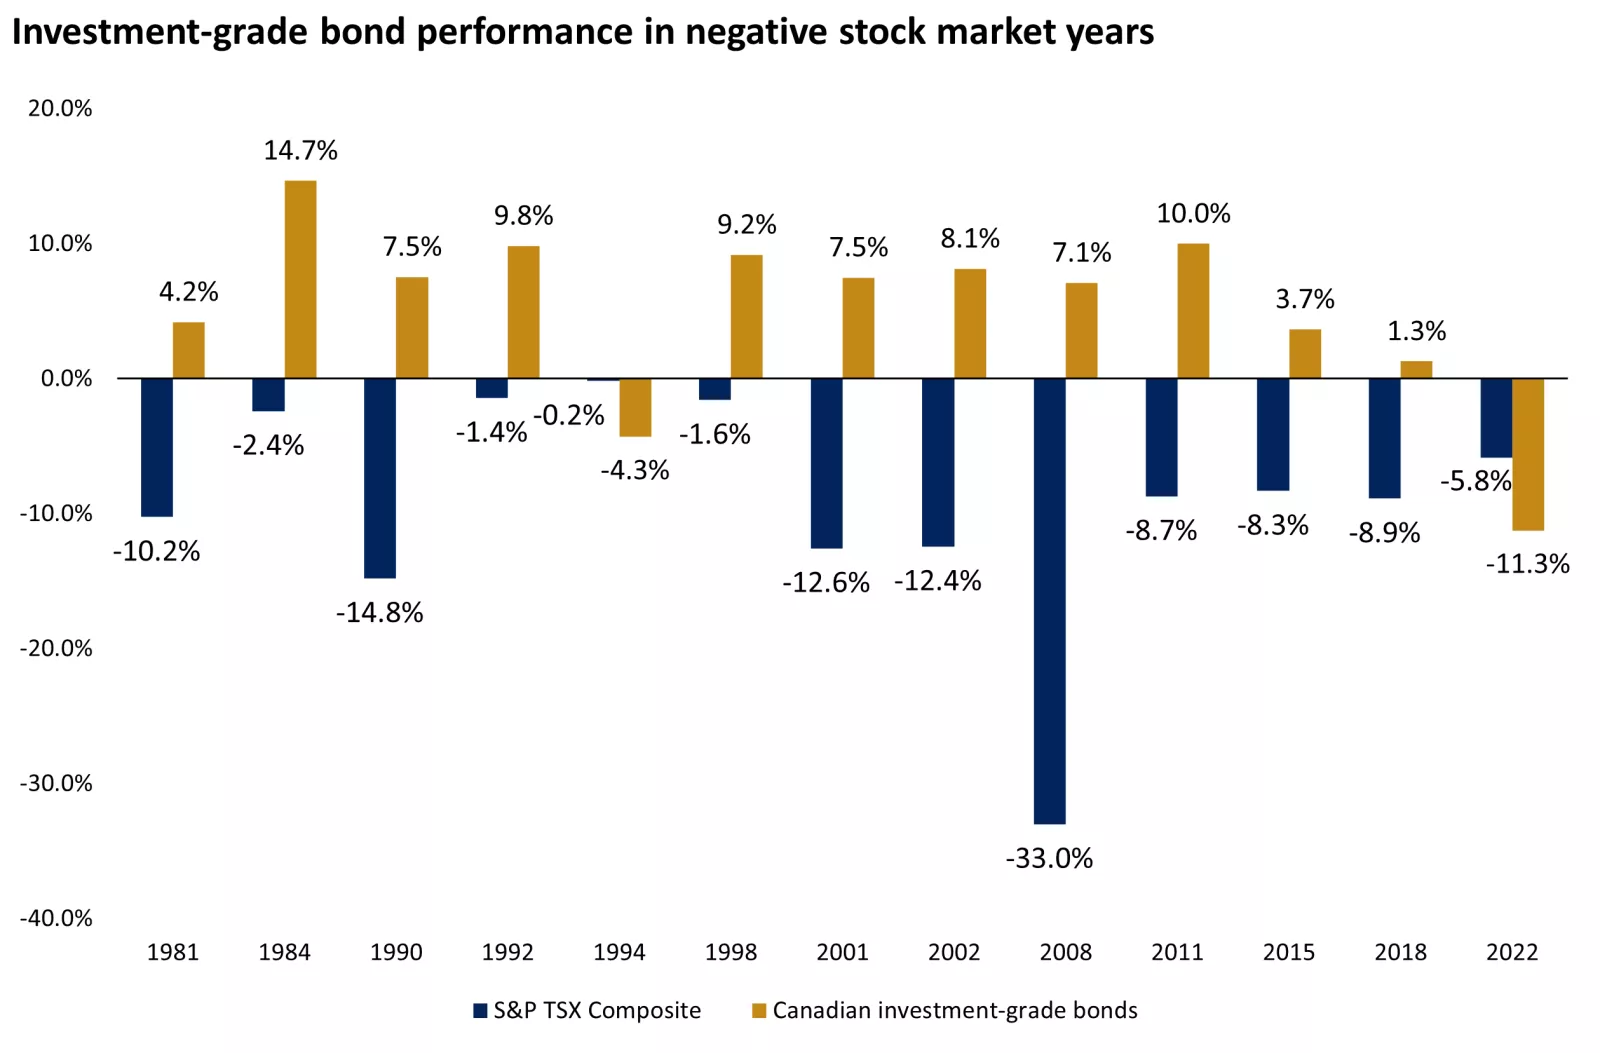 The graph shows the performance of investment grade bonds in negative stock market years.